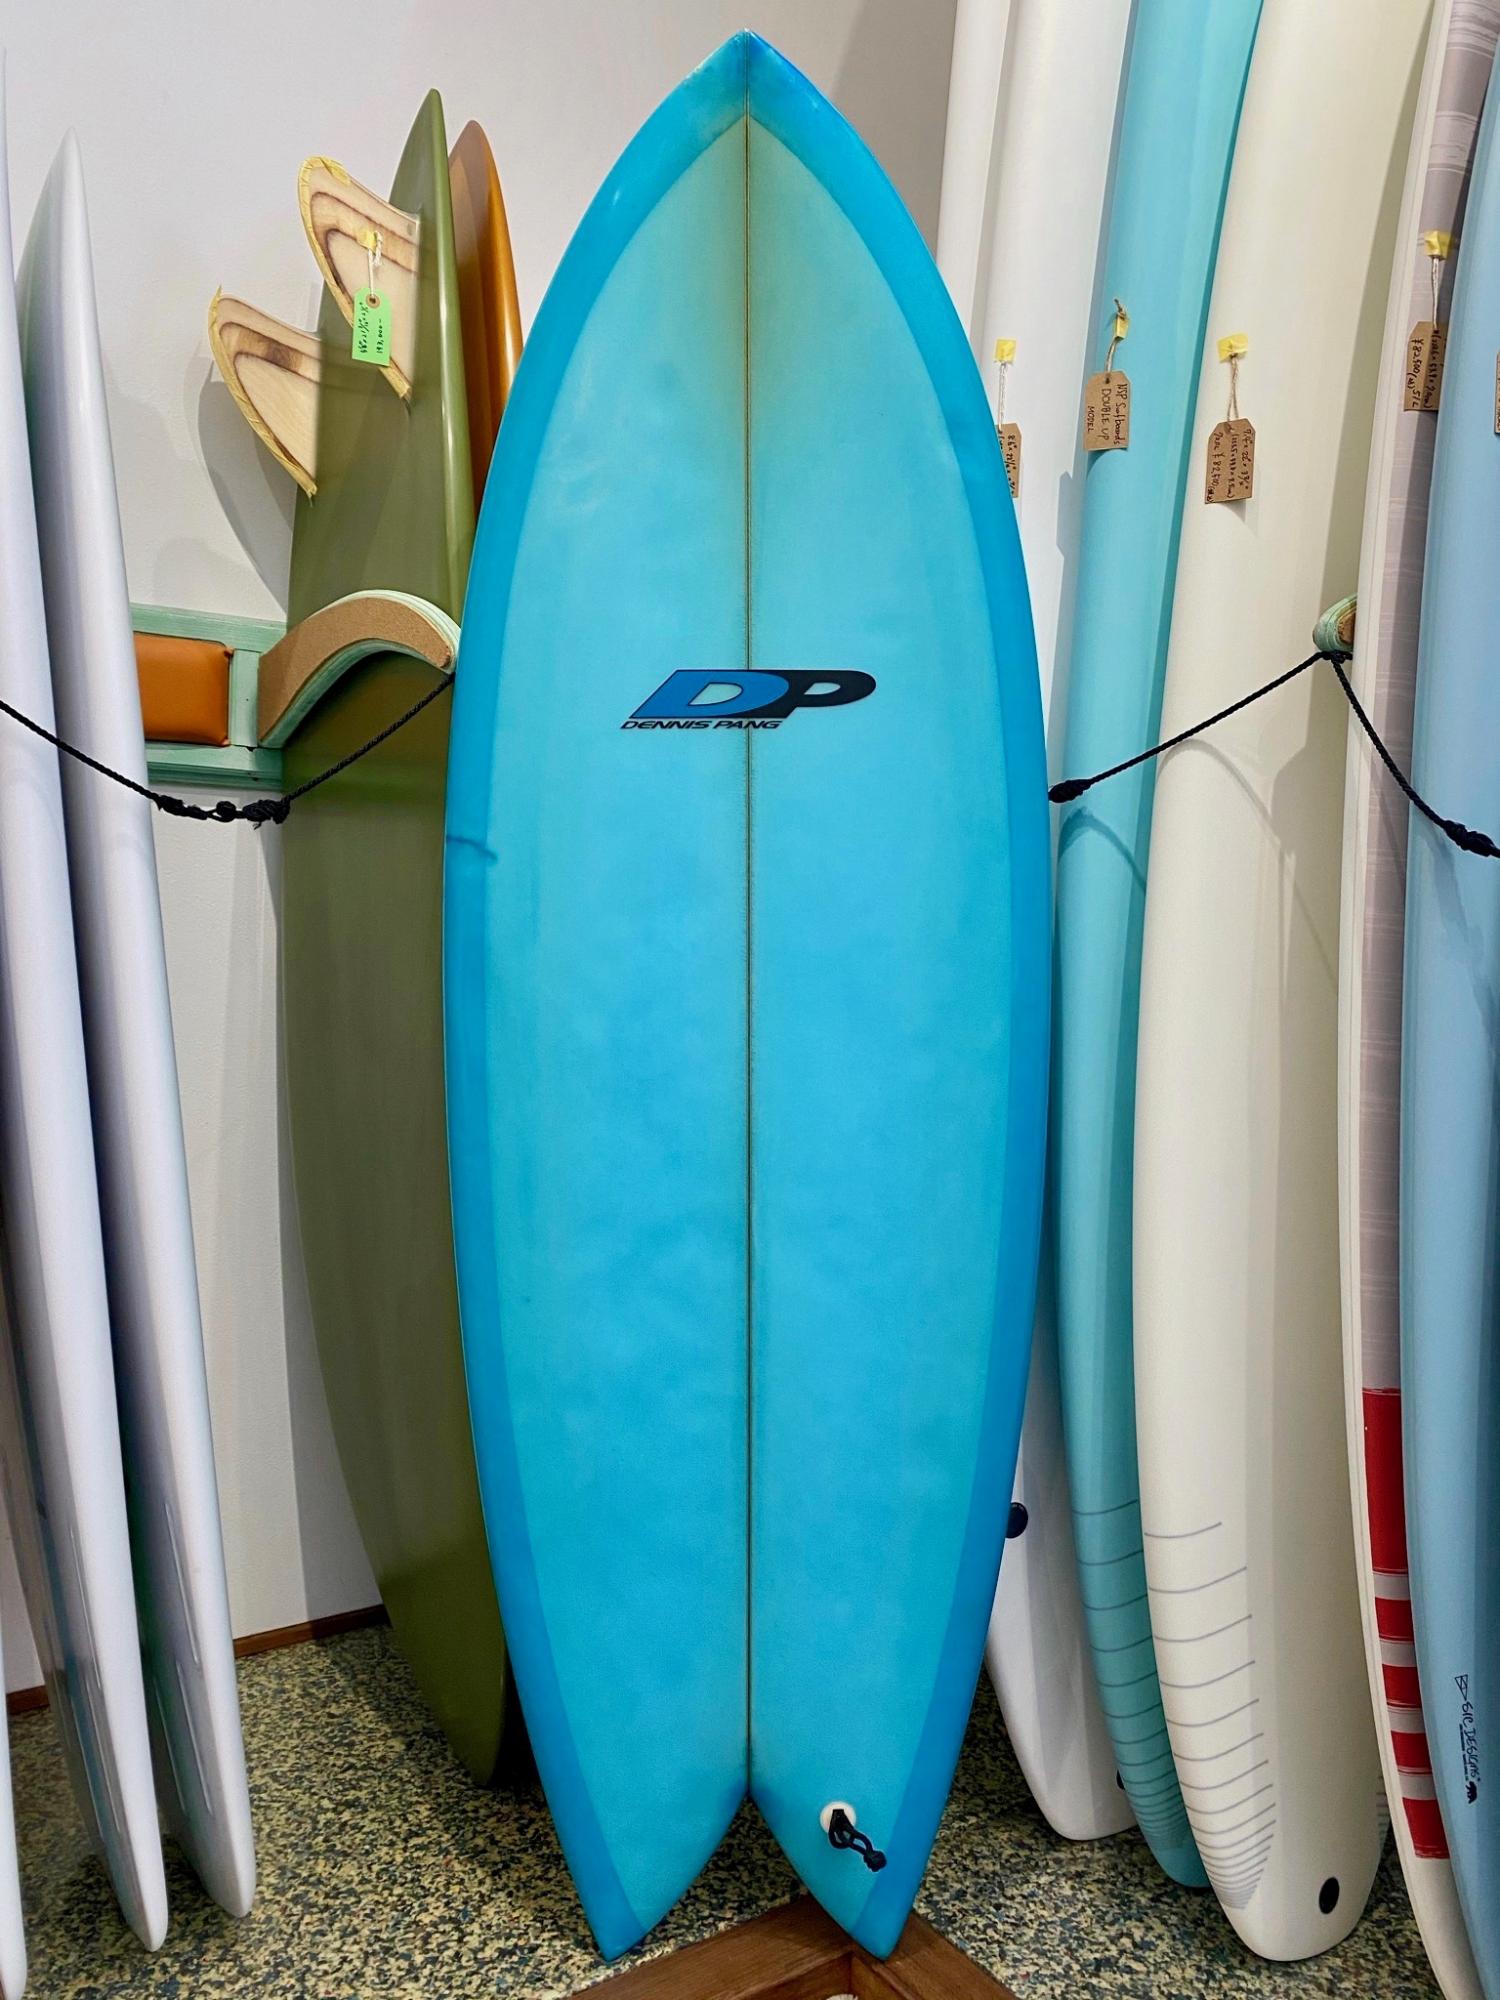 USED BOARDS (DENNIS PANG Surfboards Twin Fish 5.4)